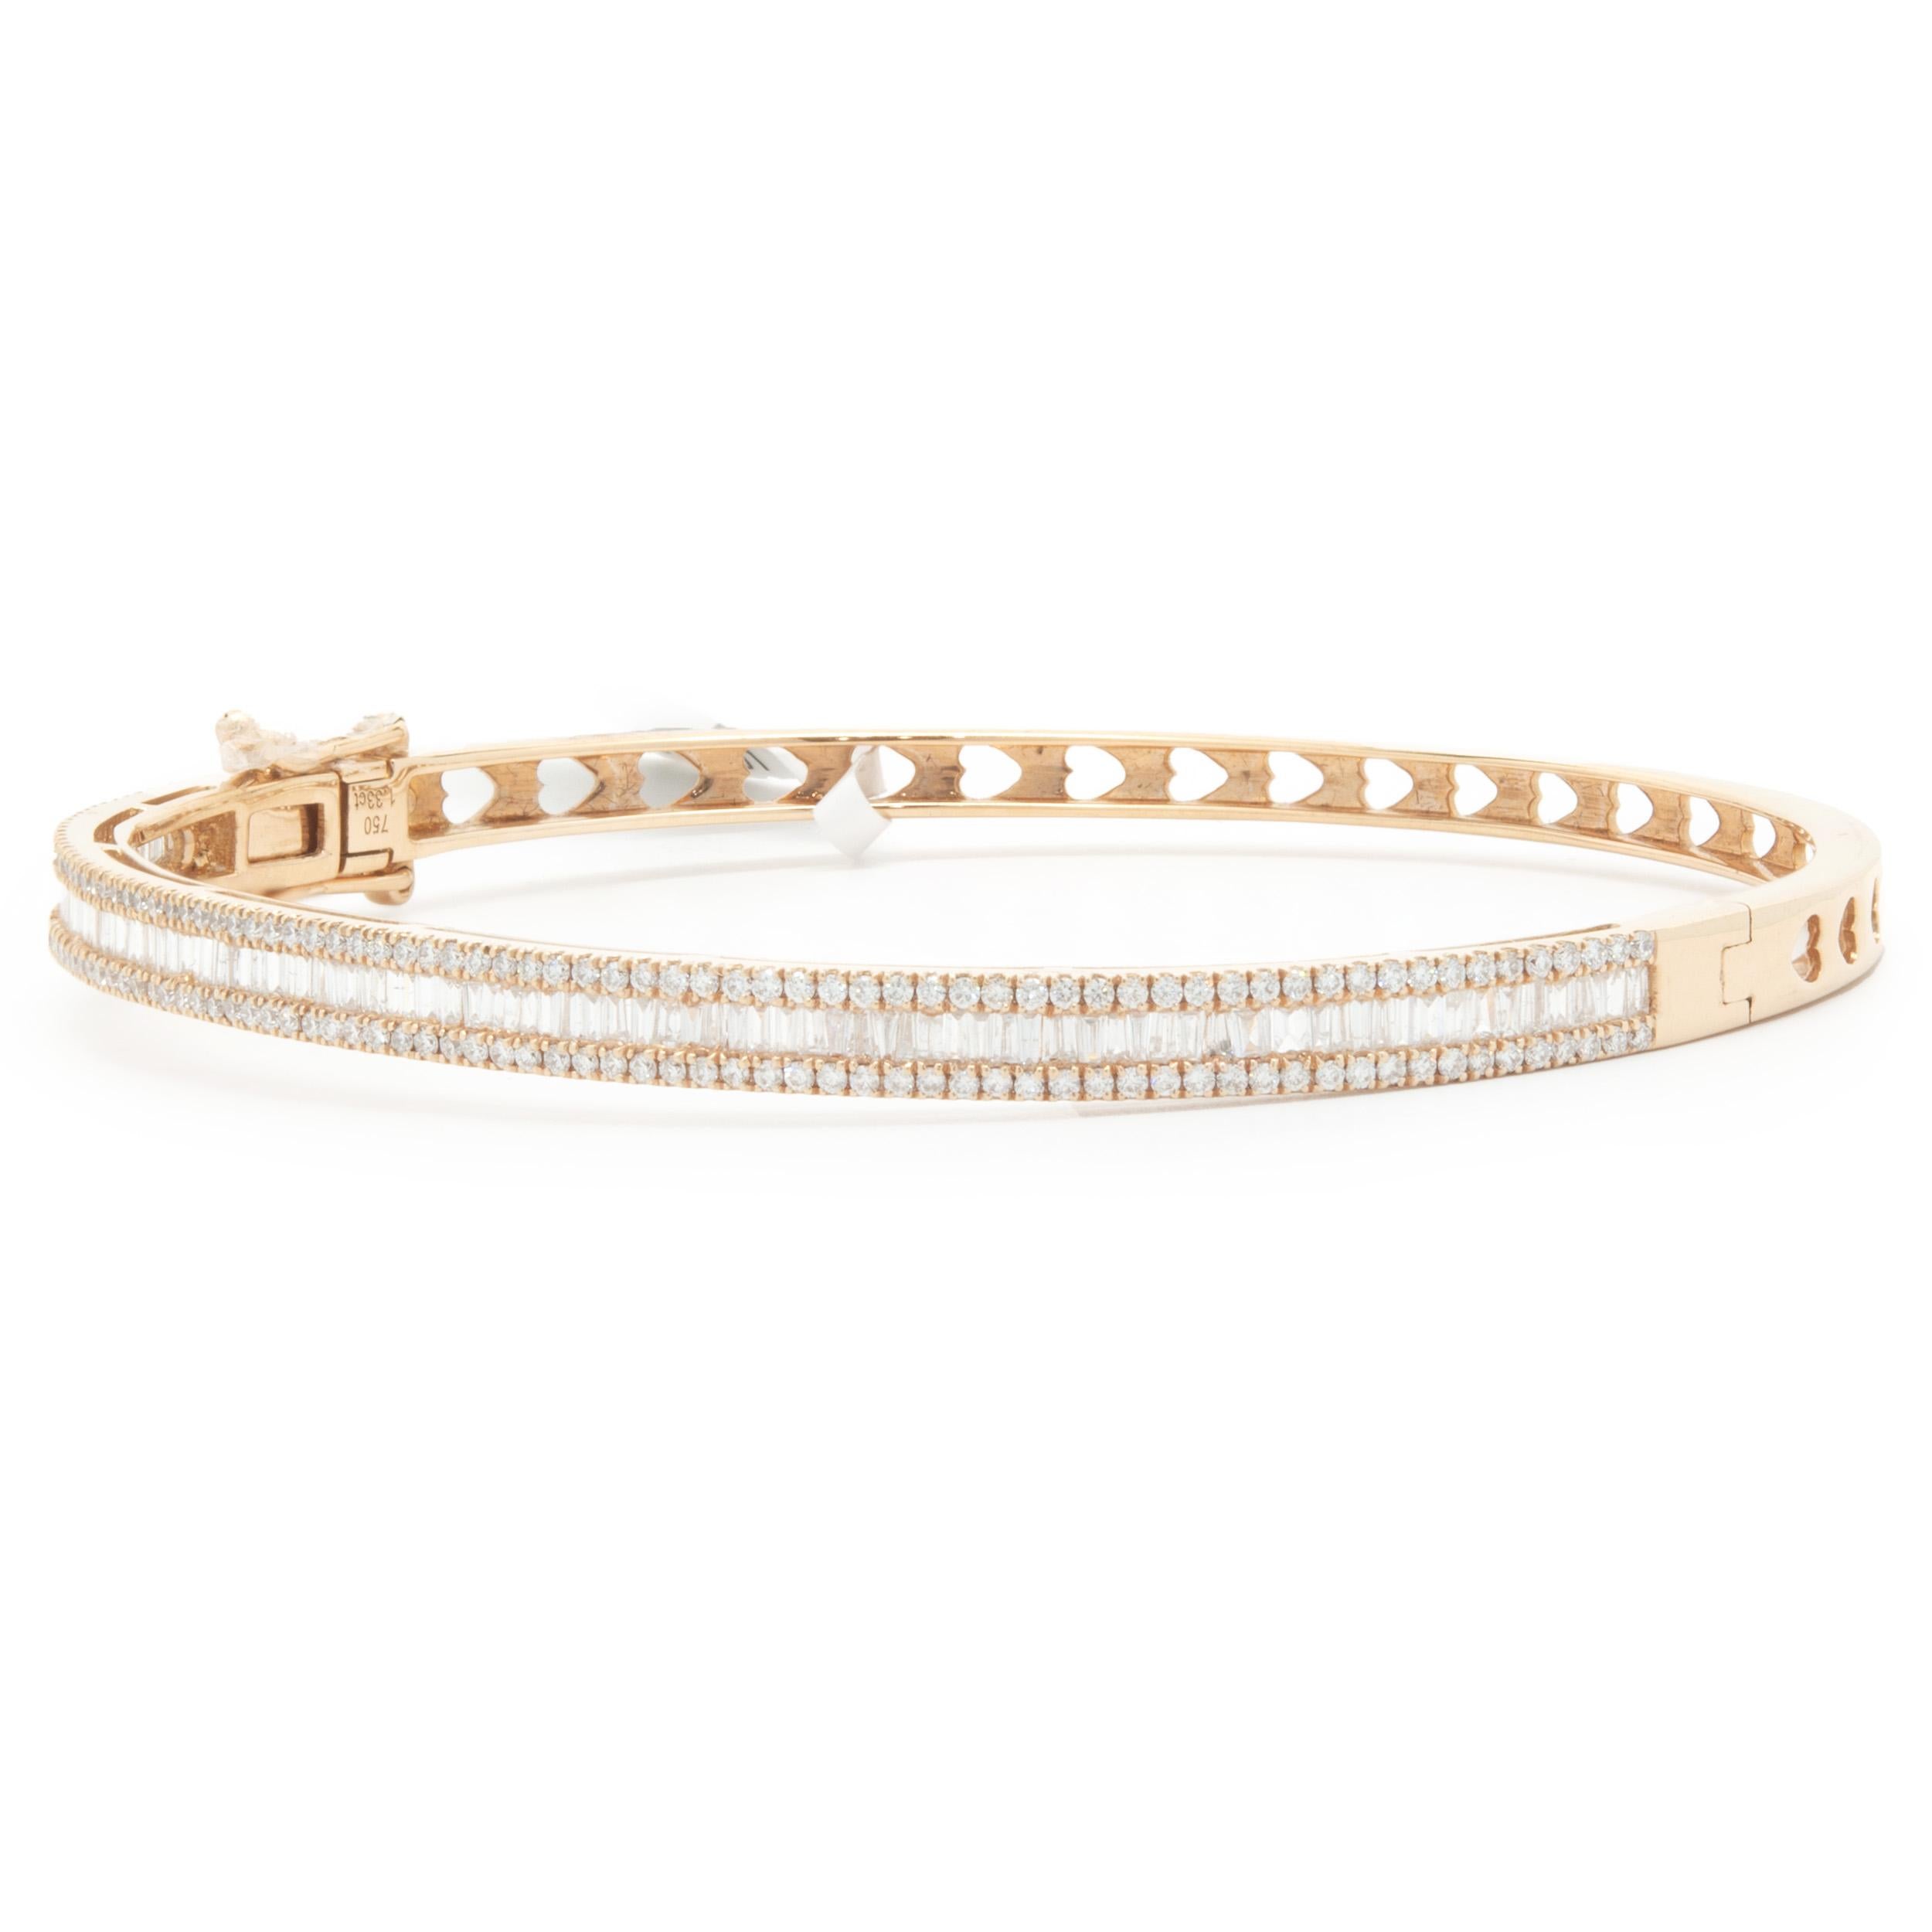 Designer: custom design
Material: 18K rose gold
Diamonds: 258 round brilliant & baguette cut = 1.33cttw
Color: H
Clarity: SI1
Dimensions: bracelet will fit up to a 7-inch wrist
Weight: 11.04 grams